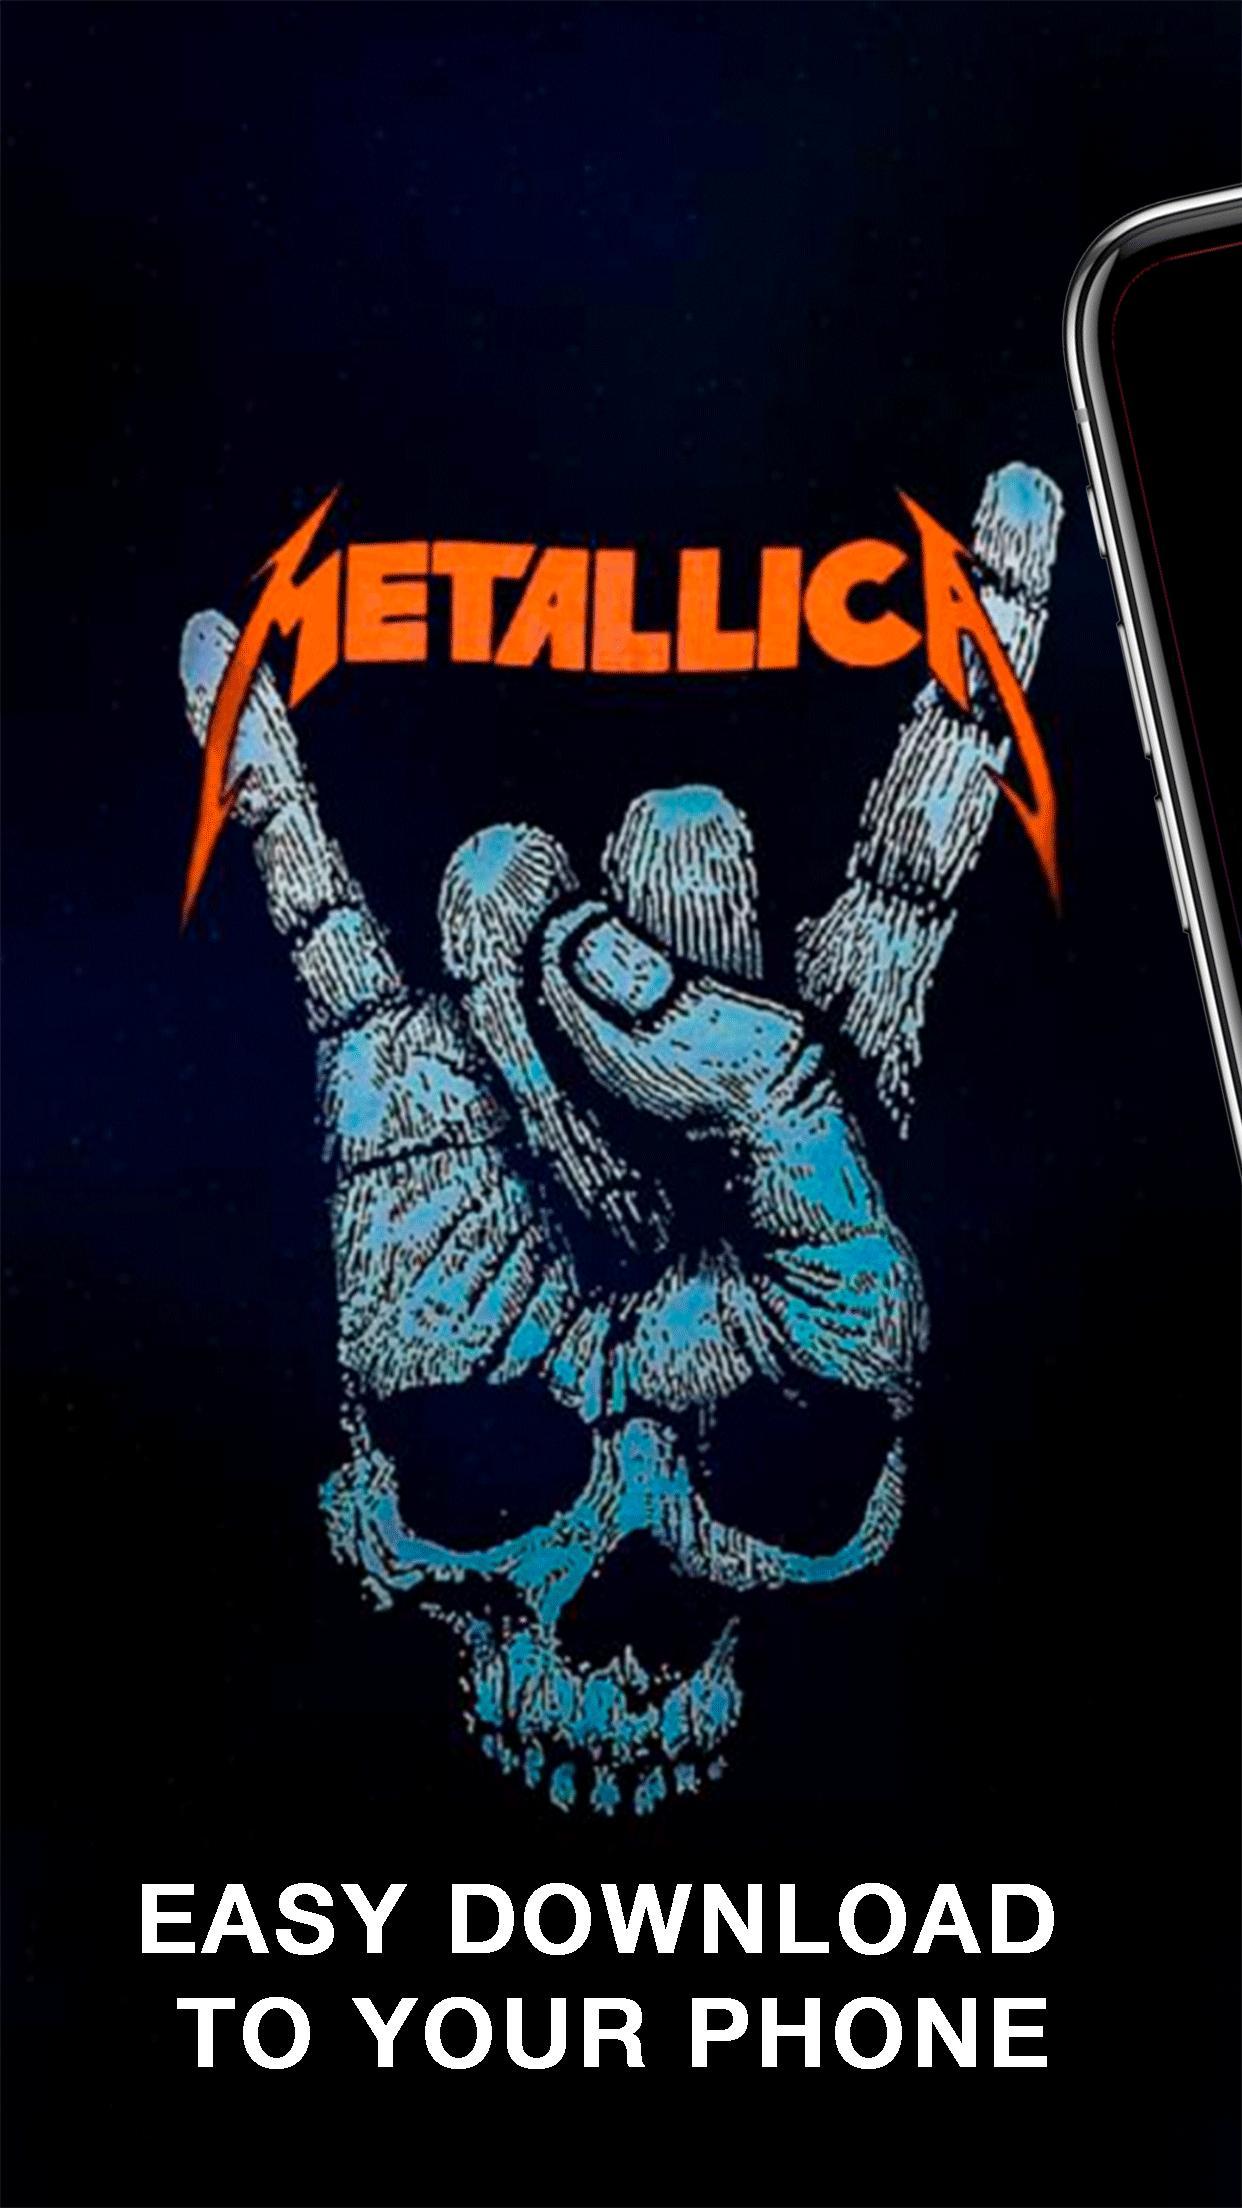 I finally made iPhone wallpapers out of all of Metallicas album covers  Garage Inc SM1 and 2 and Beyond Magnetic included Feel free to use  them  rMetallica